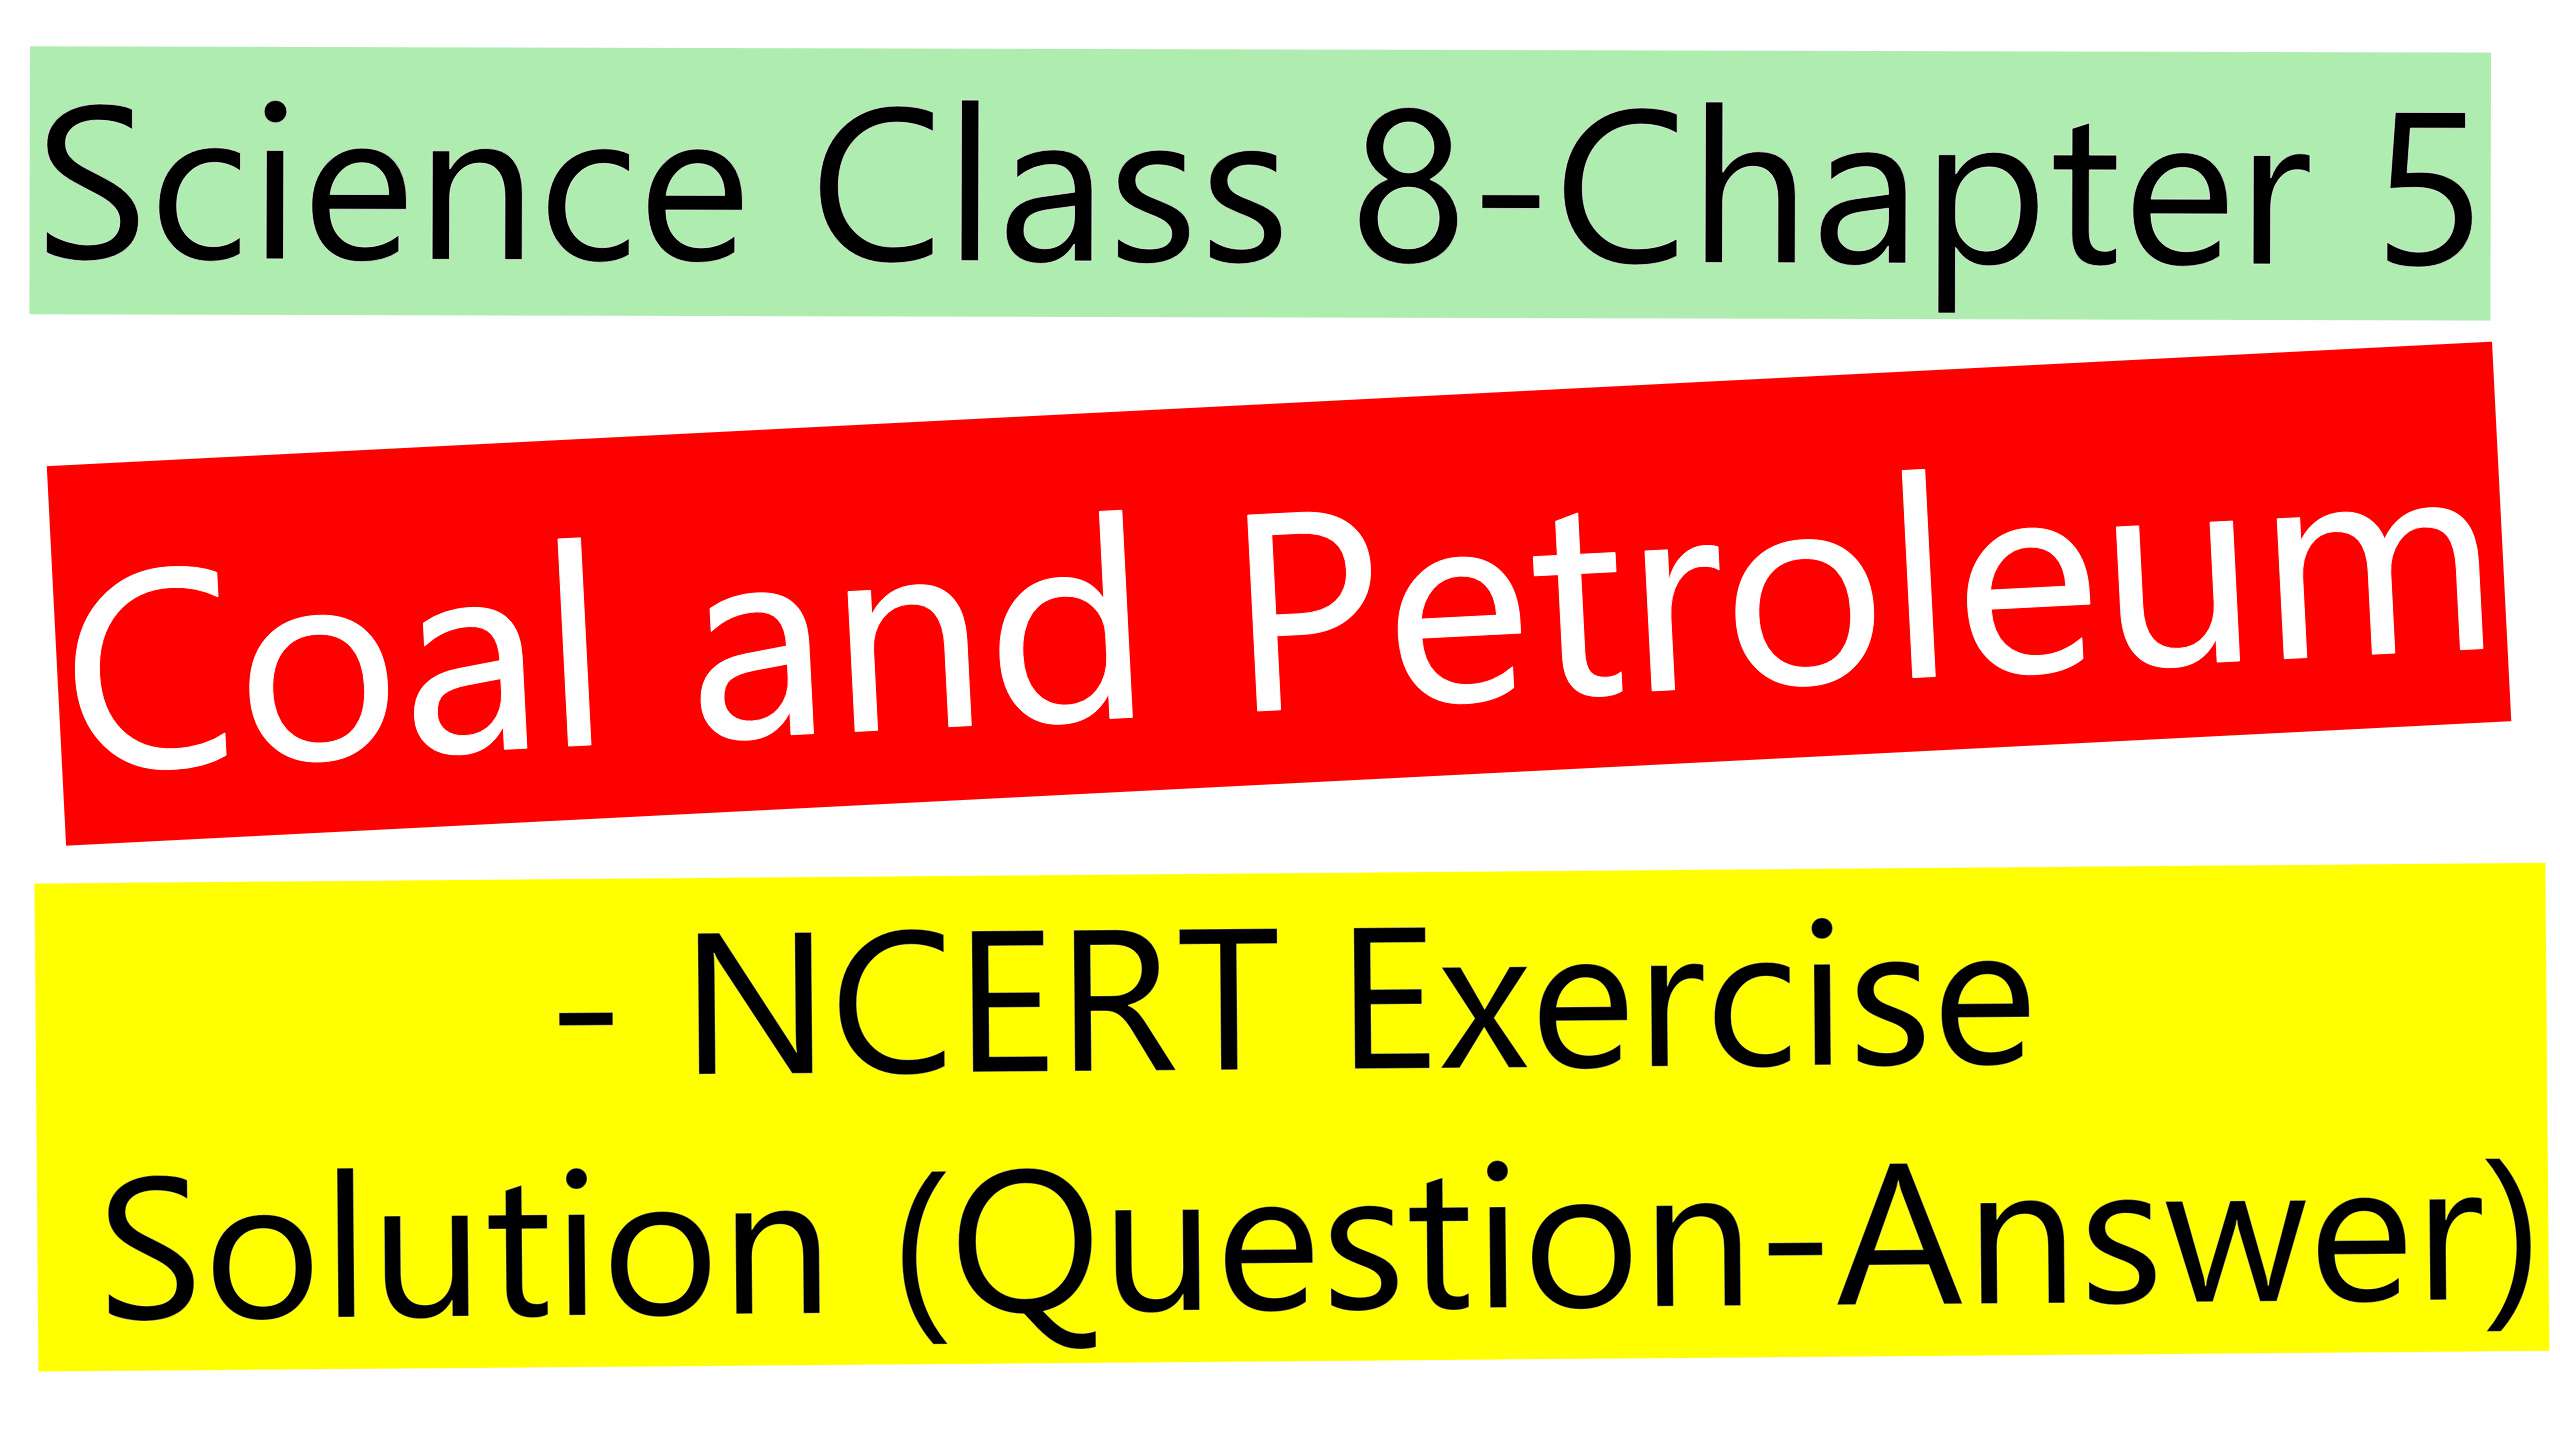 Science Class 8-Chapter 5-Coal and Petroleum- NCERT Exercise Solution (Question-Answer)